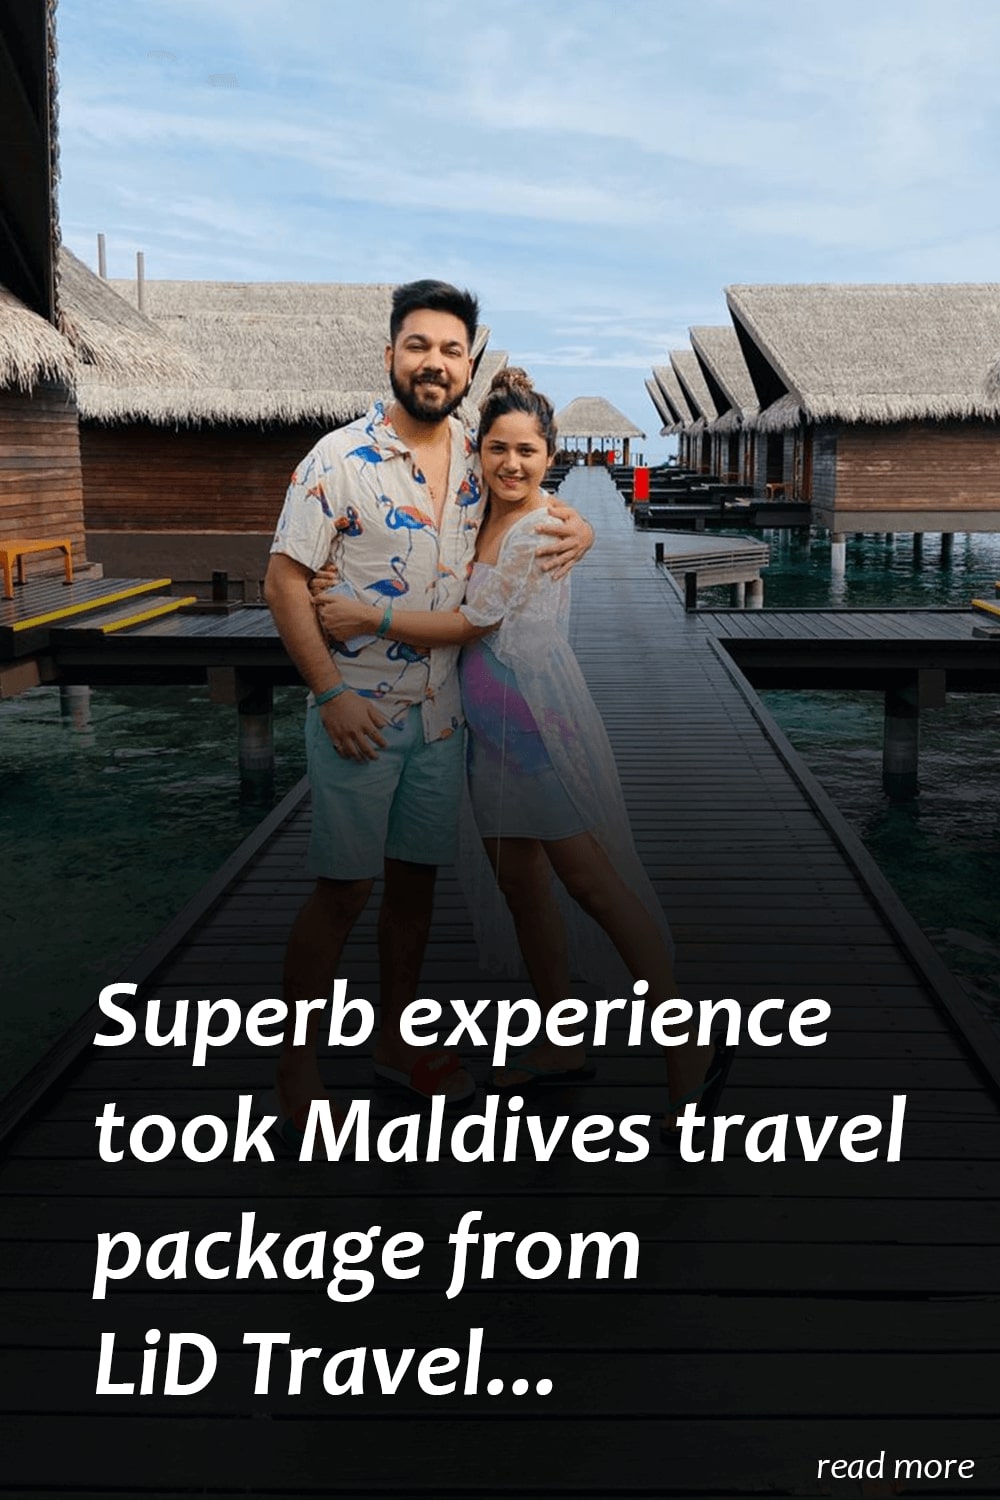 maldives honeymoon experience with lid travel